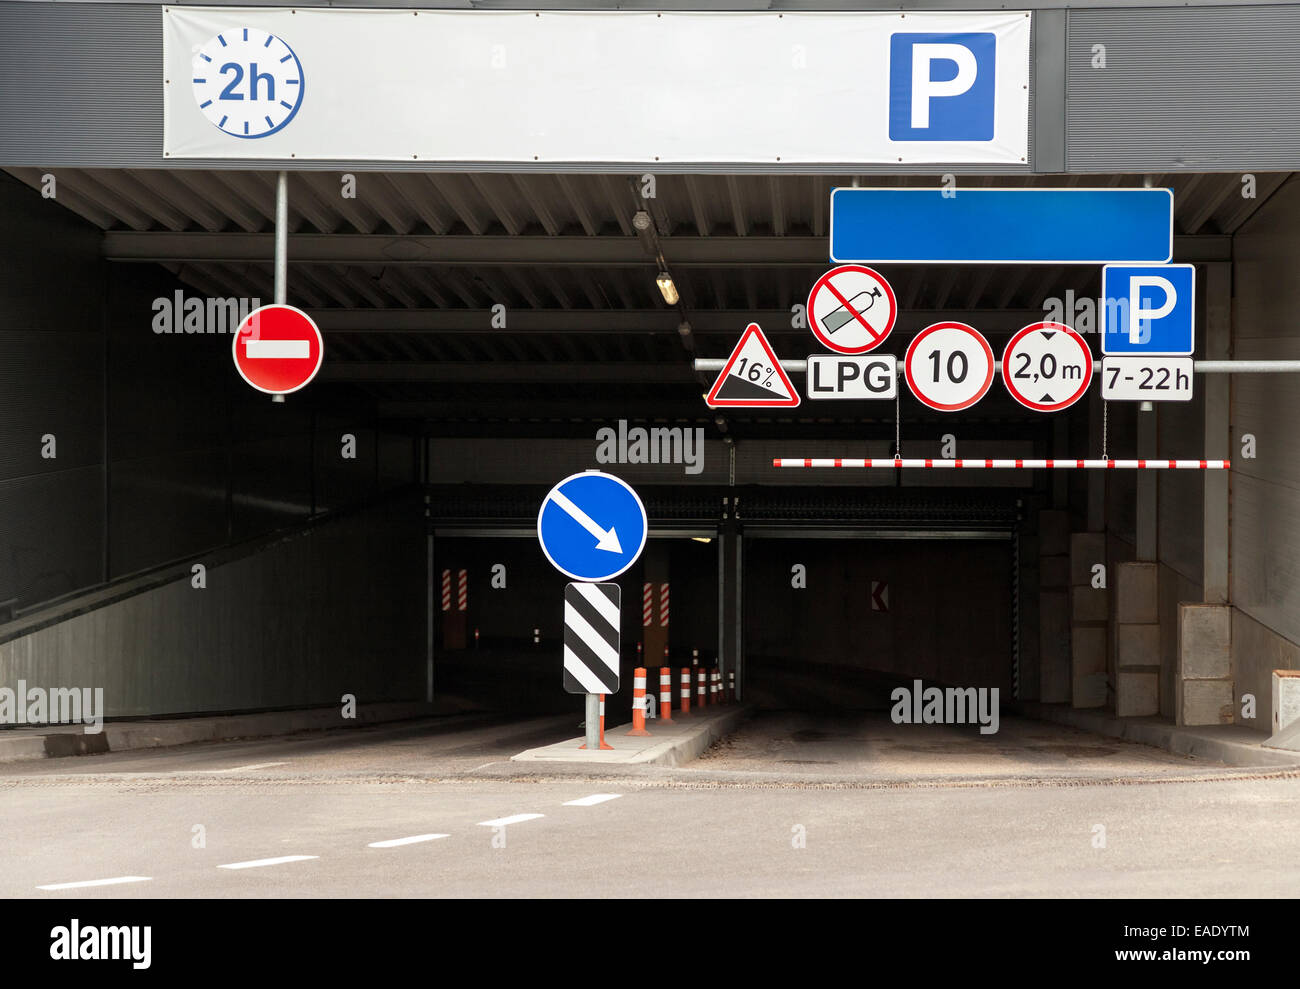 Entrance to the underground parking lot with multiple warning road signs Stock Photo